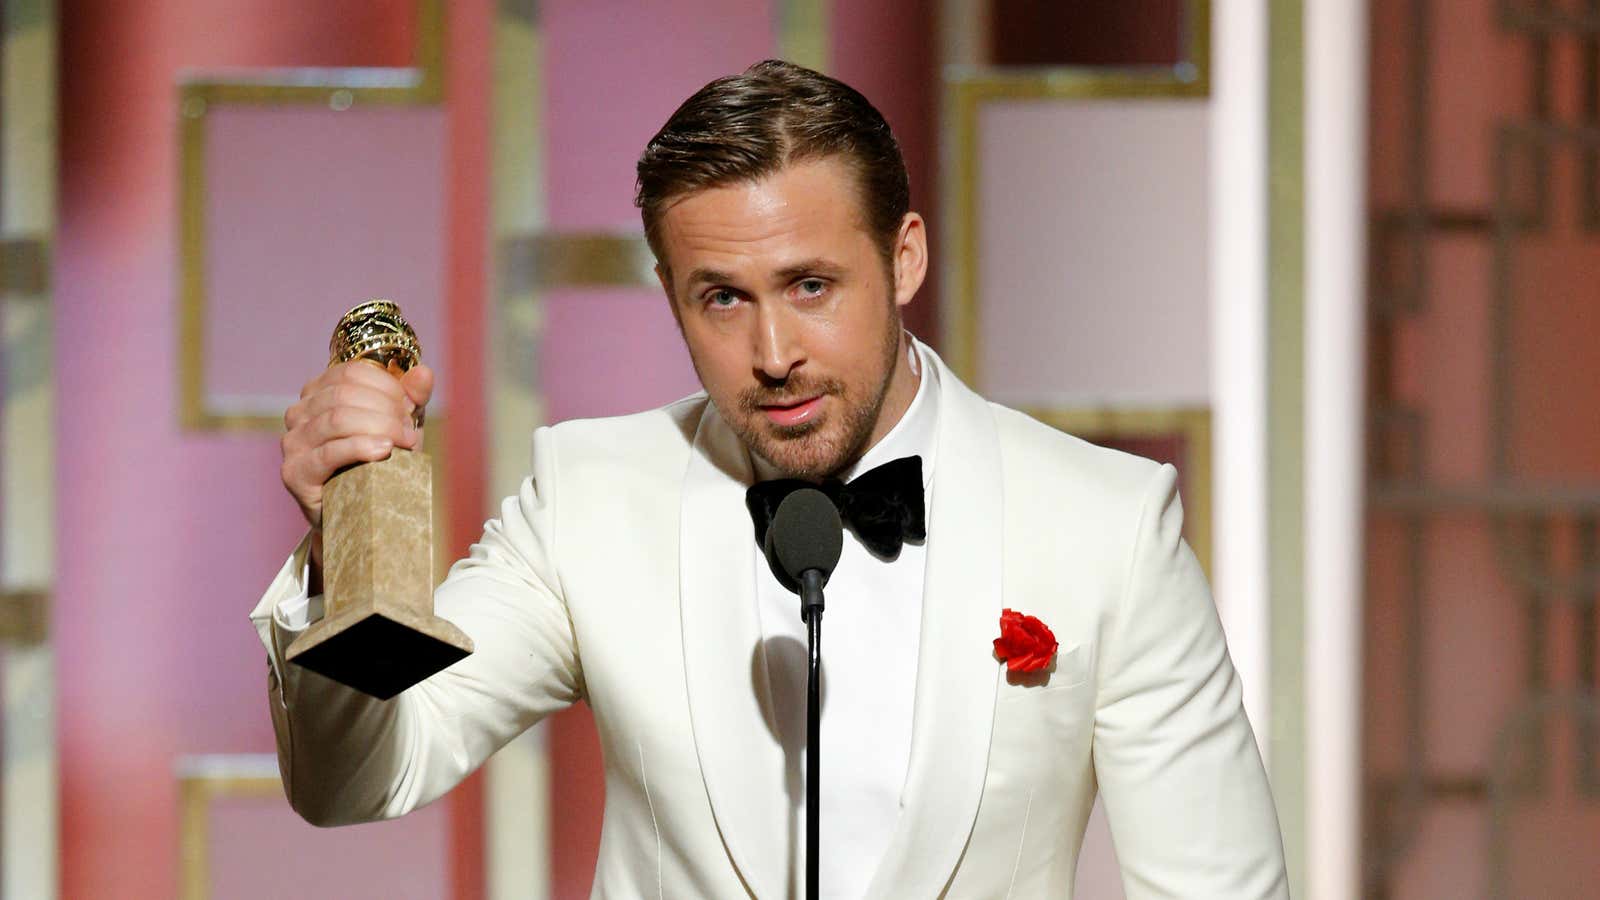 Watch Ryan Gosling remind us how hard it is to be a woman—even if you’re married to Ryan Gosling